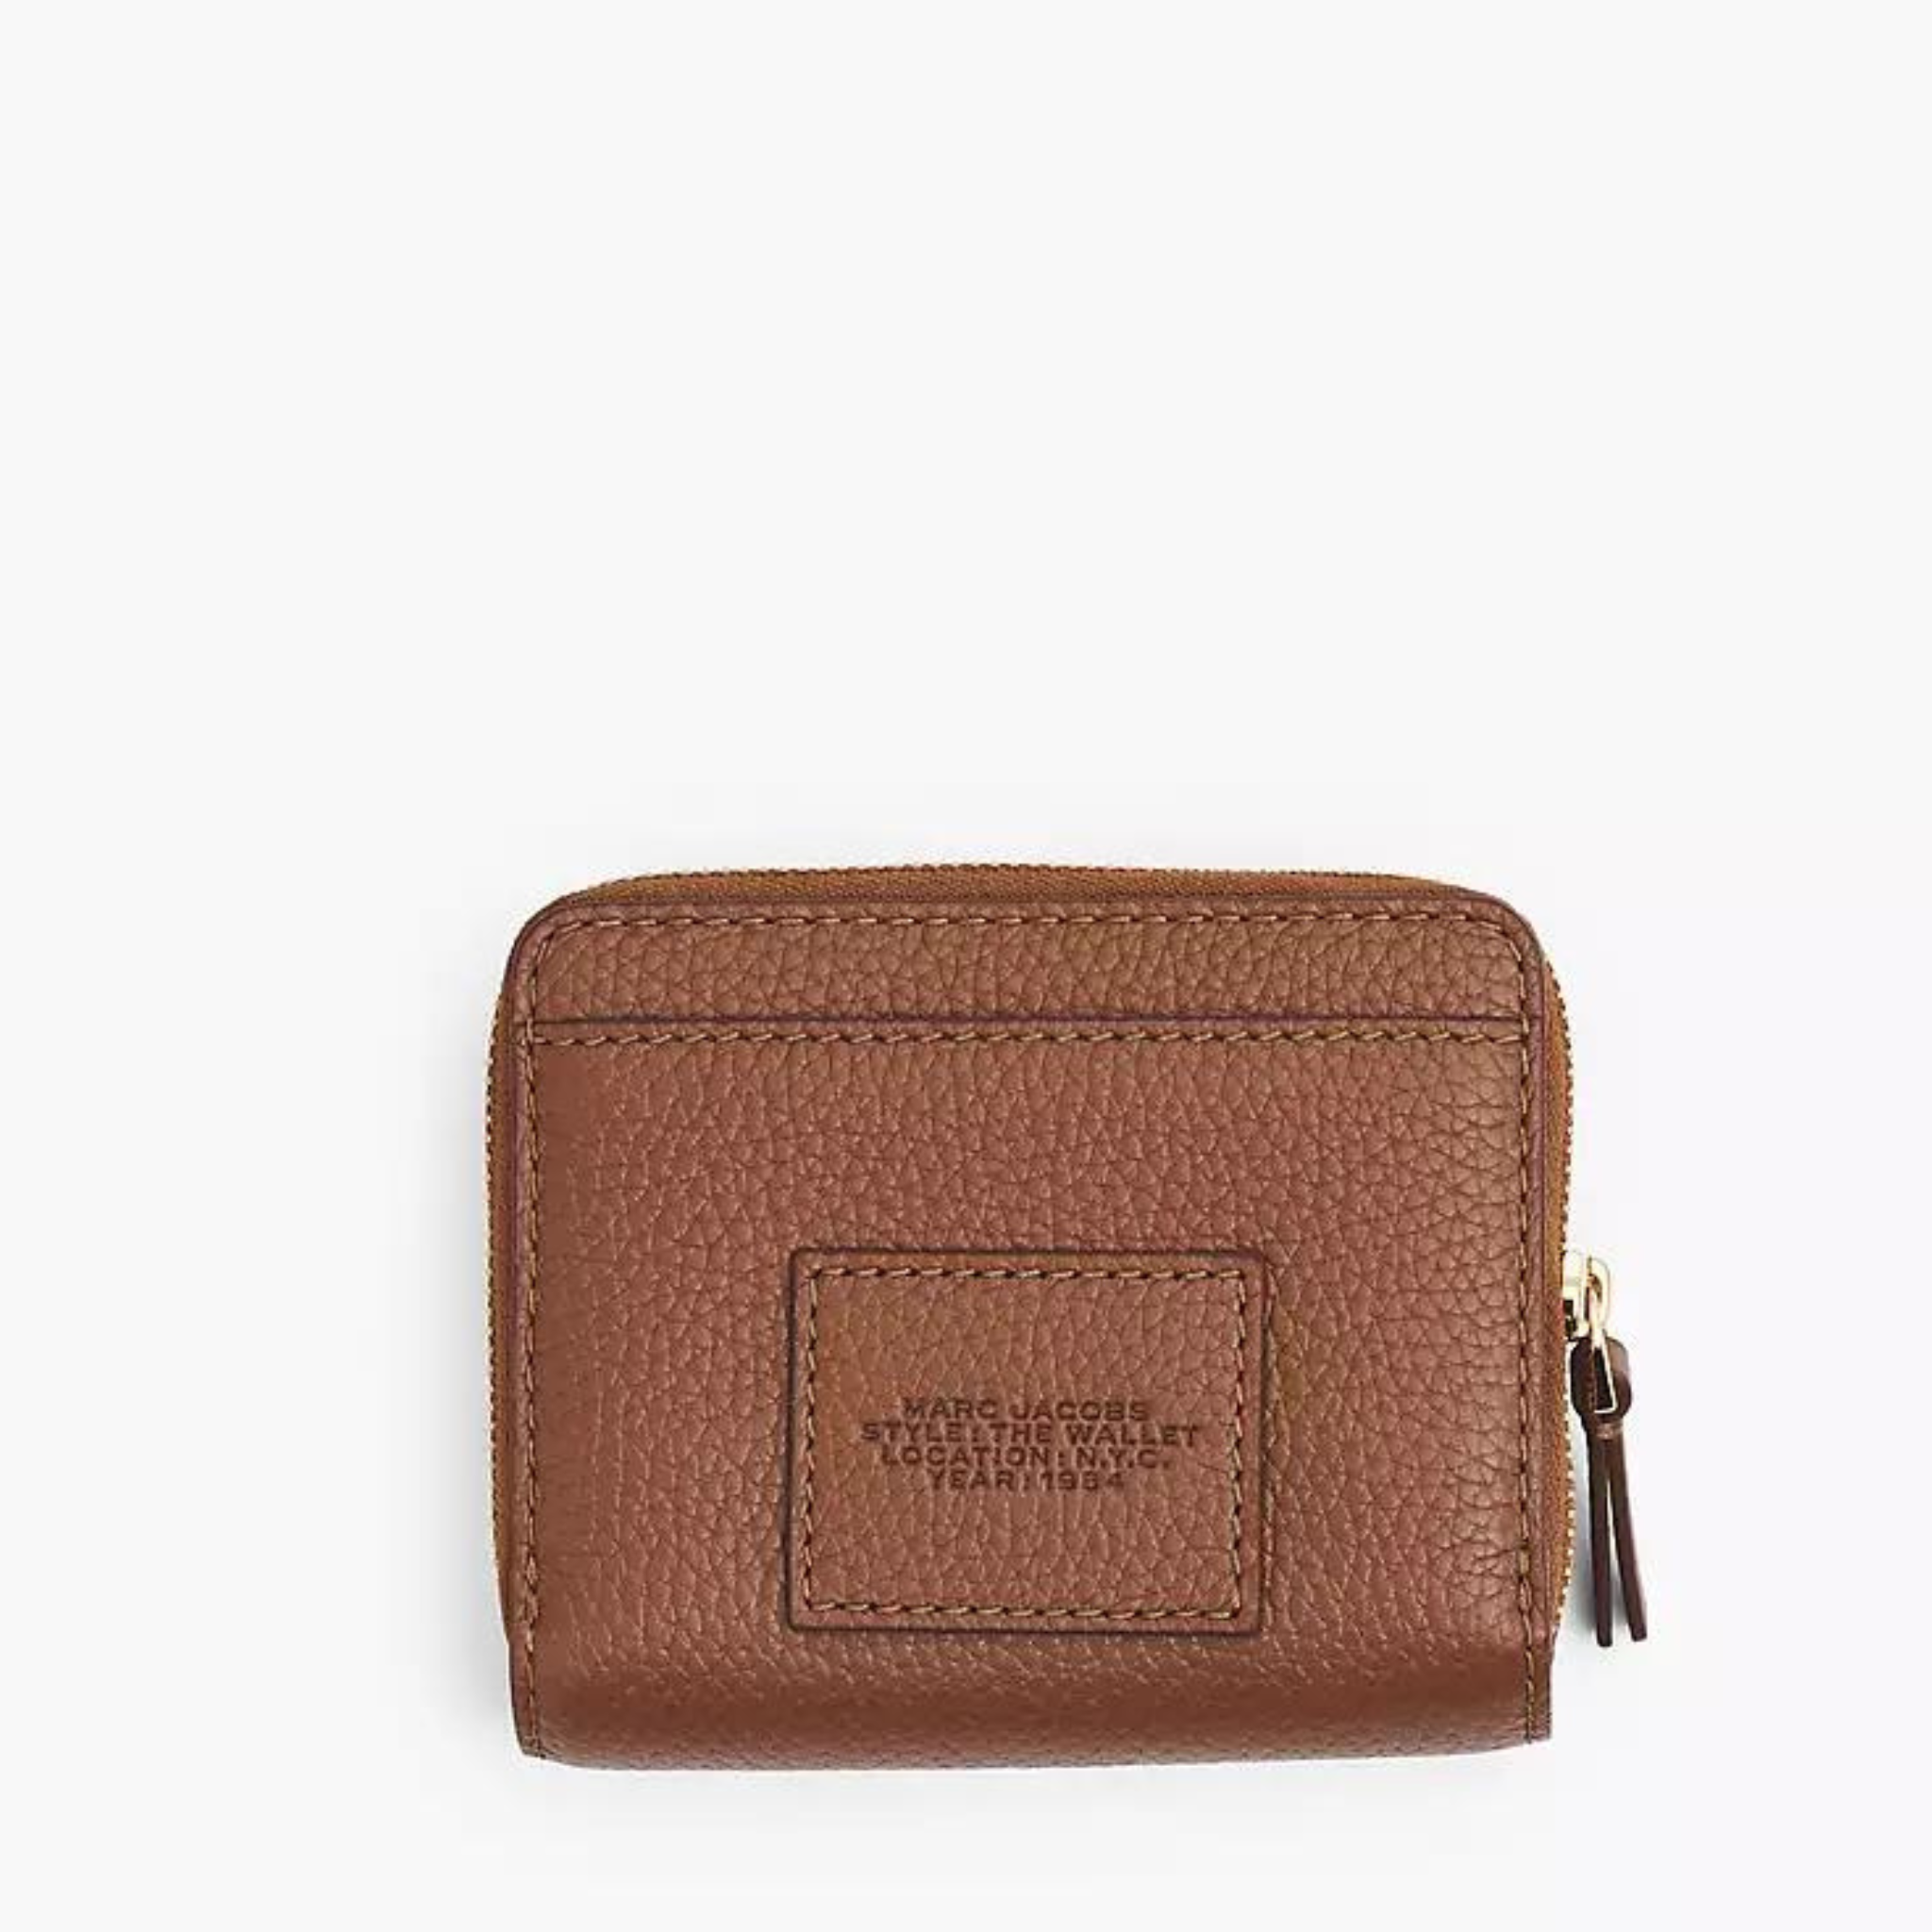 Buy Marc Jacobs Compact Wallet - Black | Nelly.com